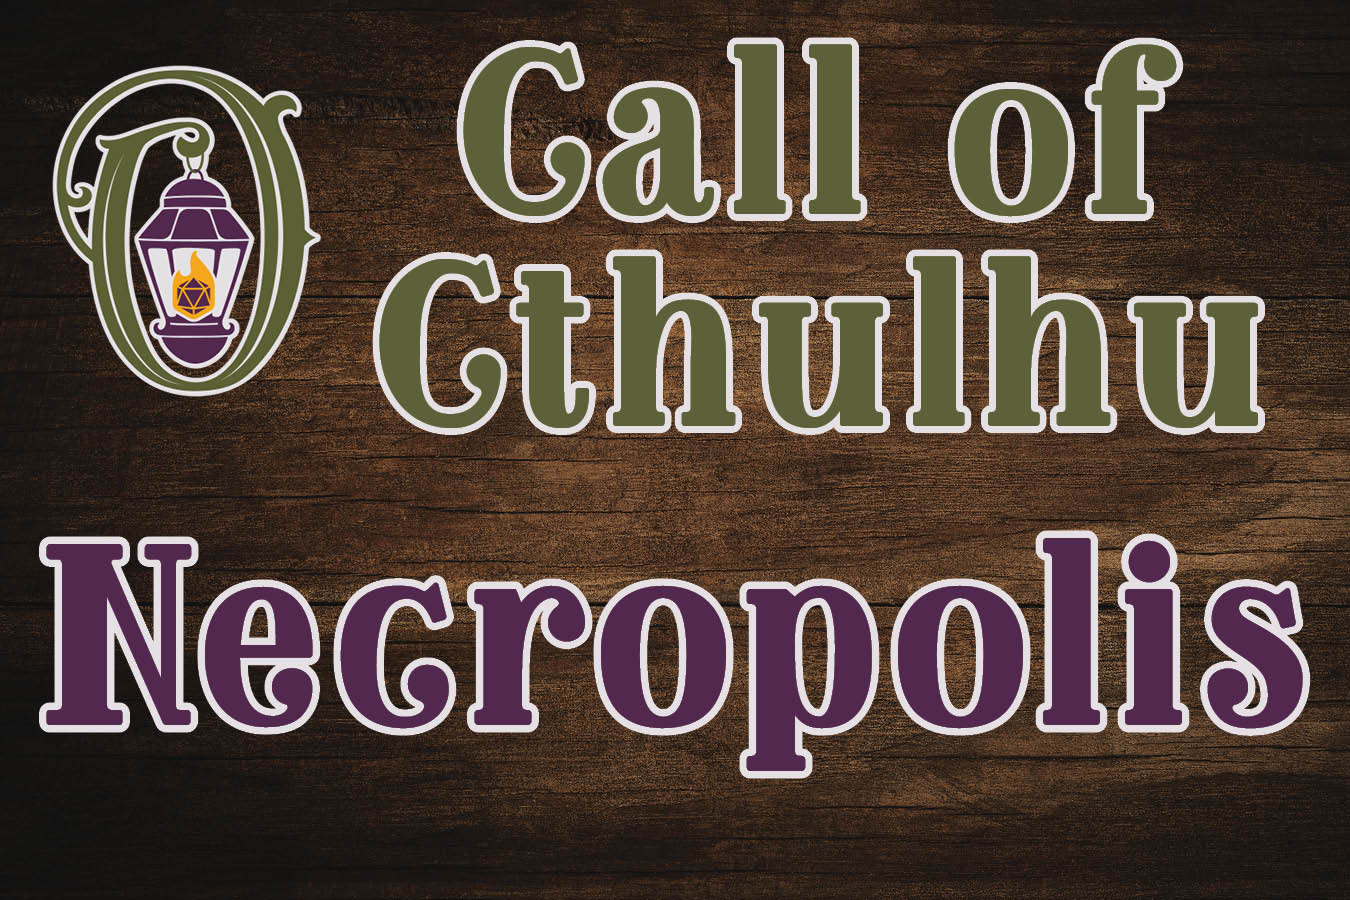 Call of Cthulhu Necropolis